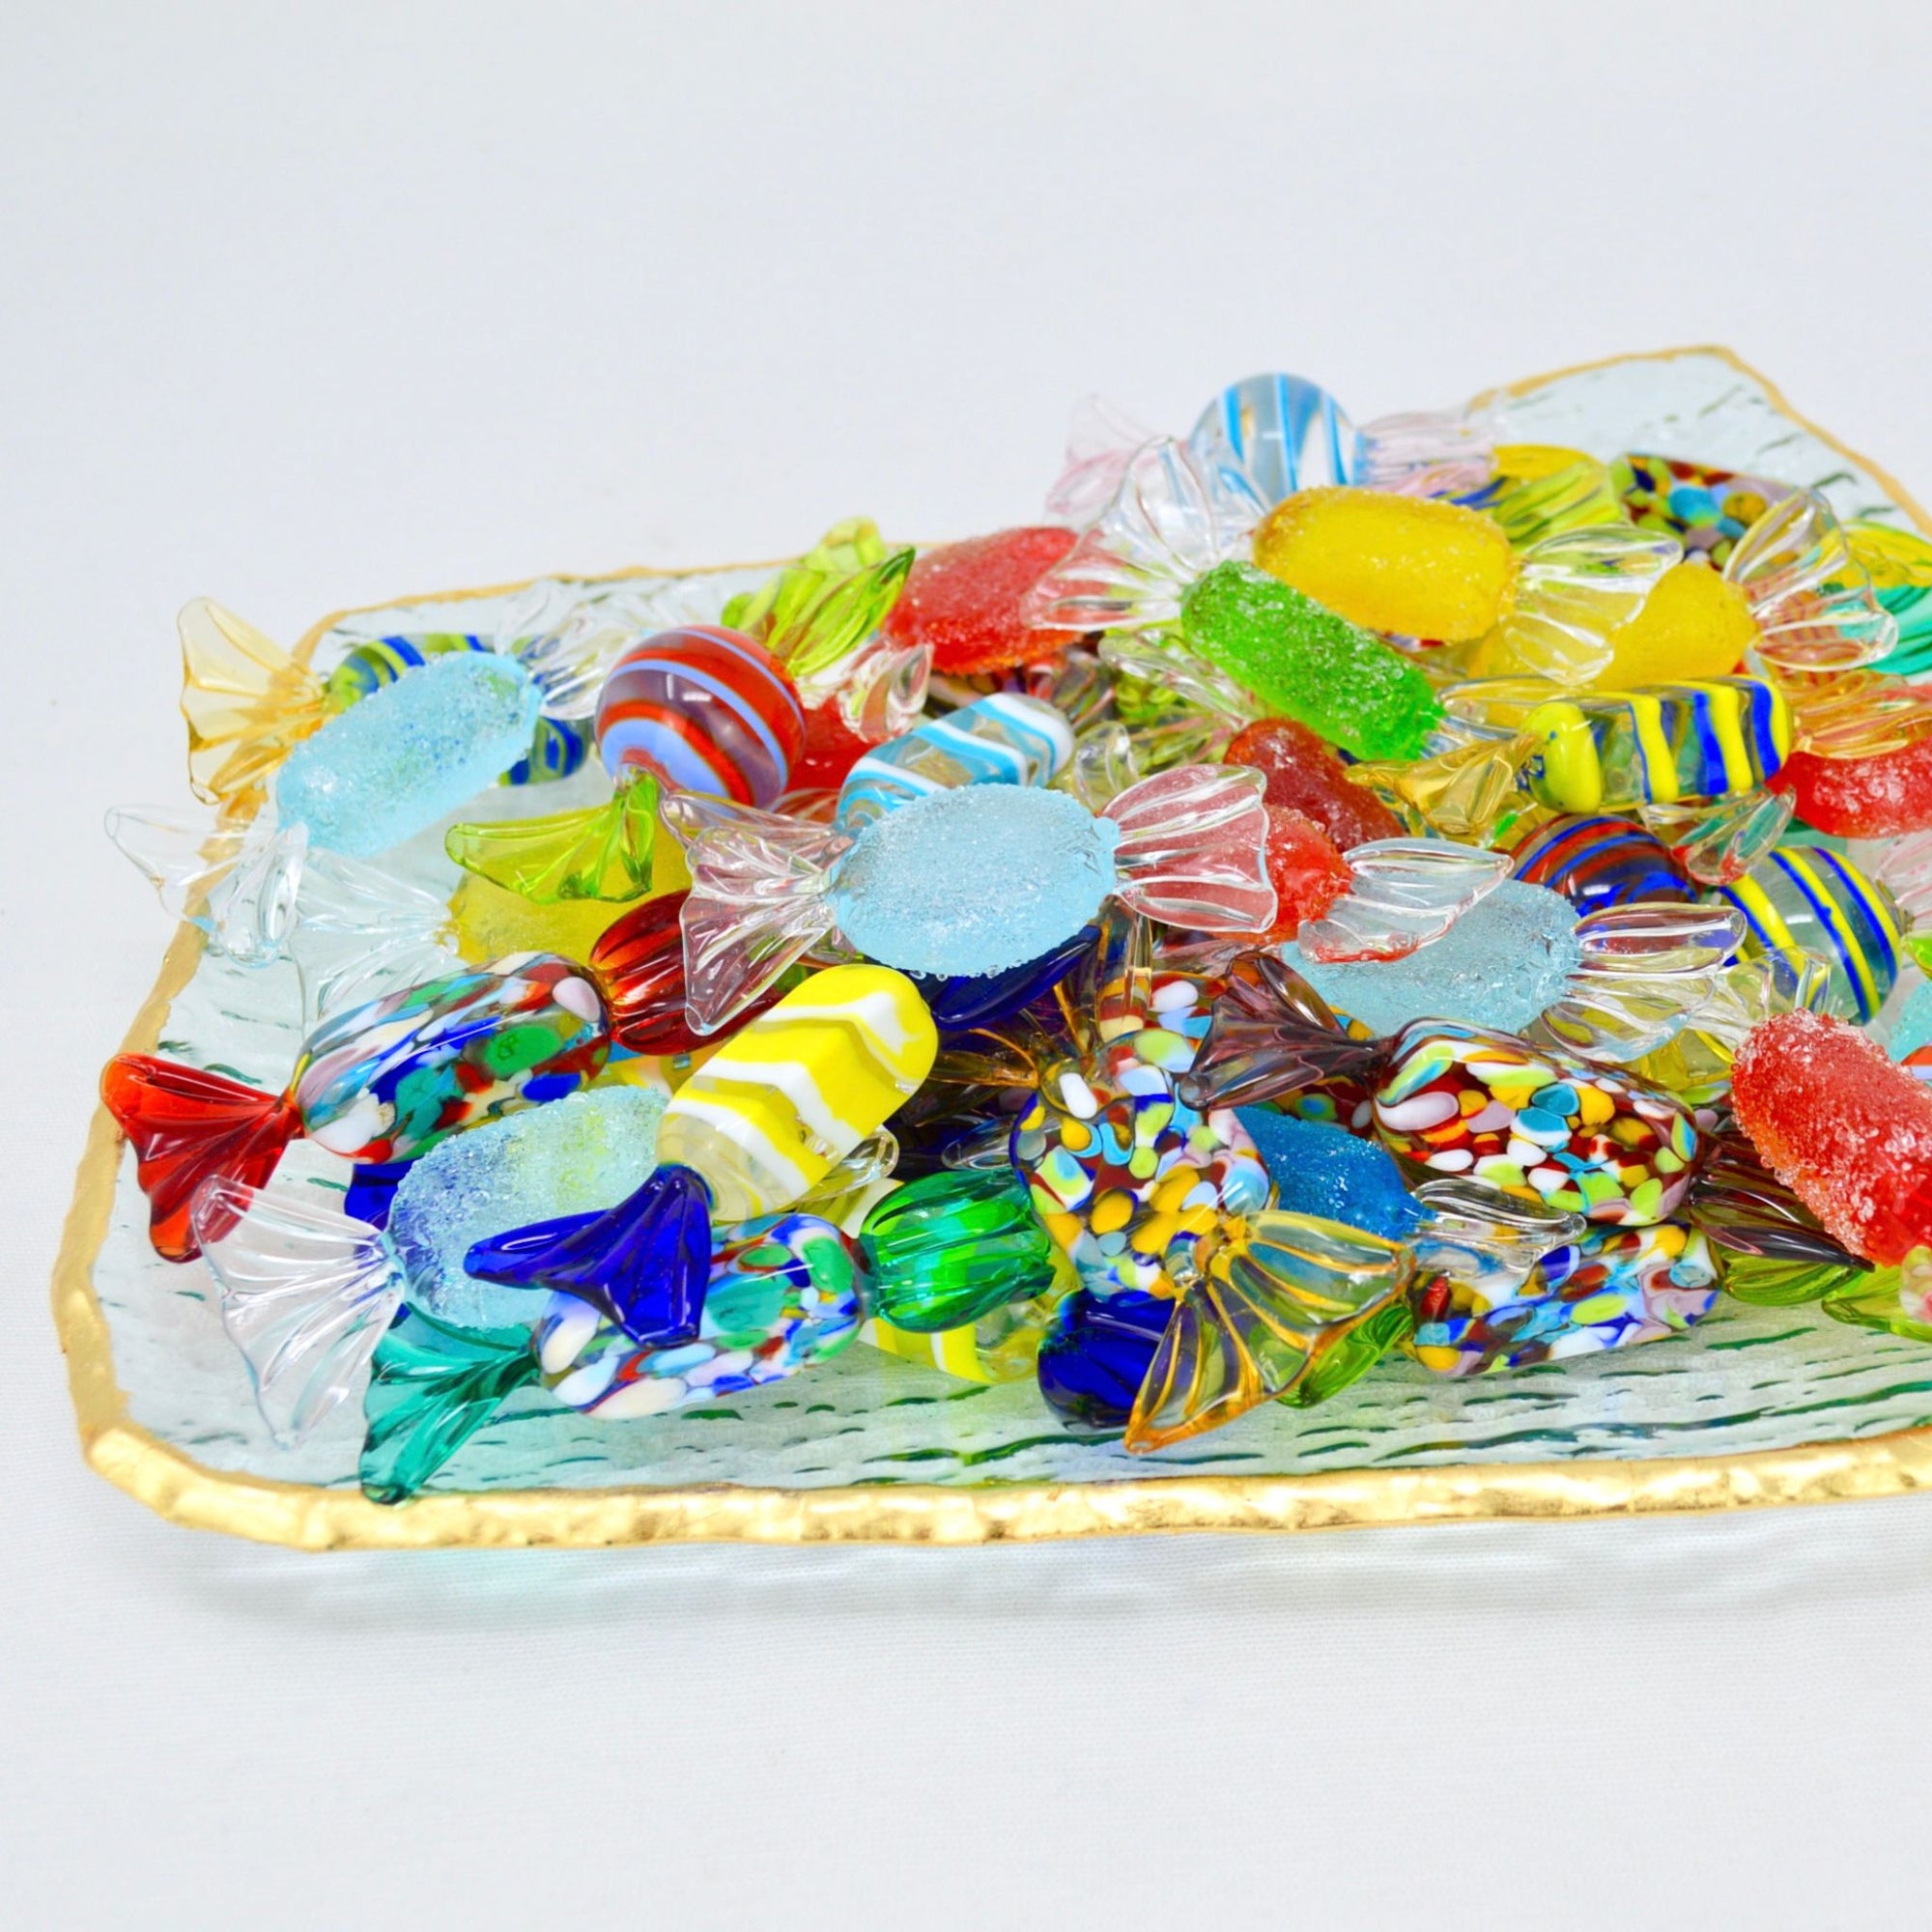 Murano Glass Candy, Classic, Set of 3, 5, or 10 Candies, Decorative Glass Sweets - My Italian Decor